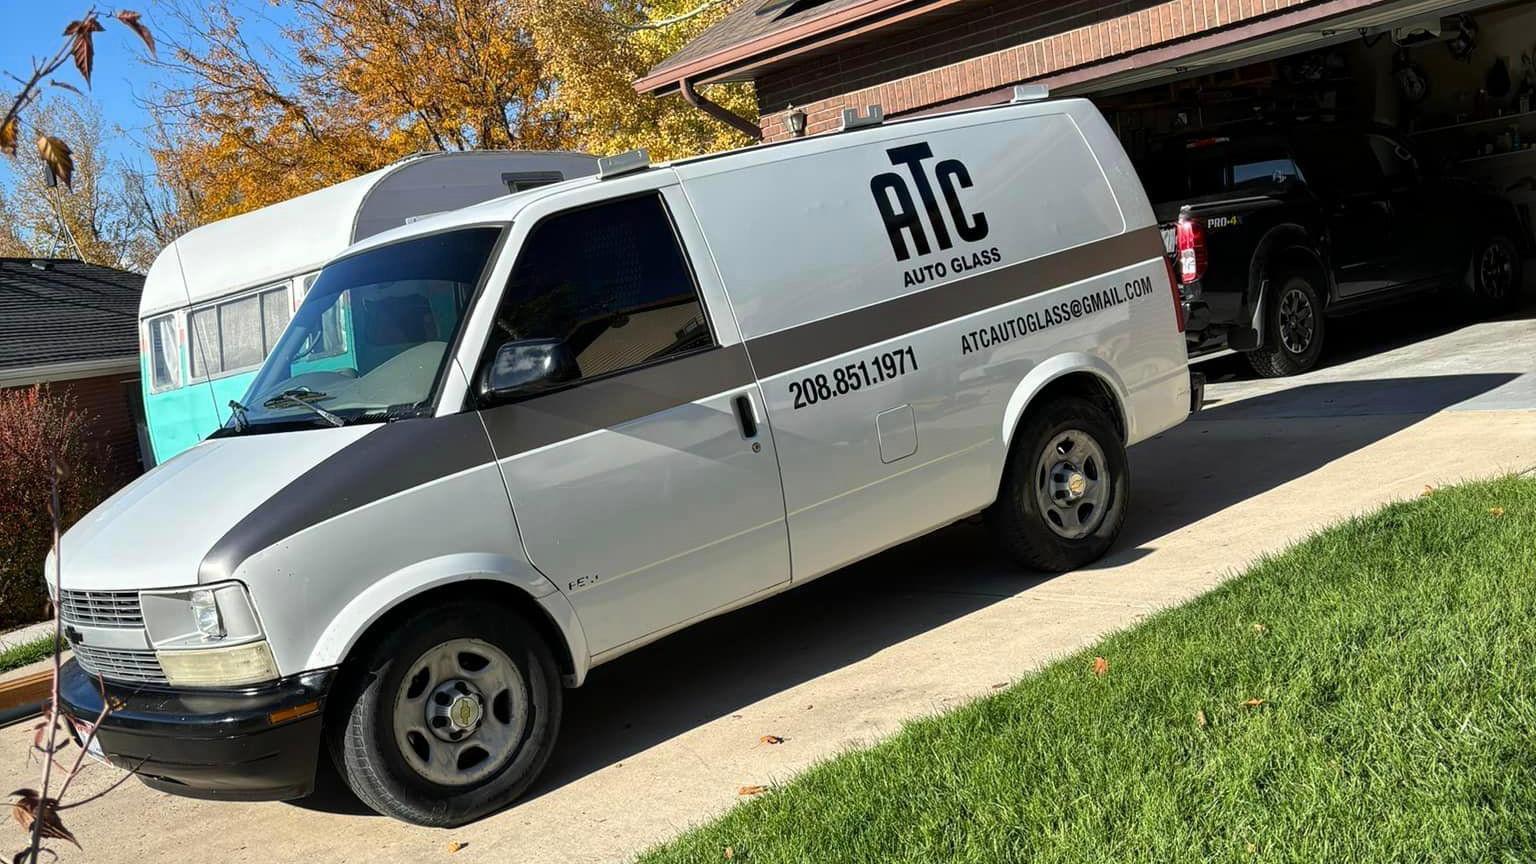 When your vehicle's glass sustains damage, trust ATC Auto Glass for prompt and efficient mobile auto glass repair services. Our dedicated owner will come to you, equipped to fix cracks, chips, or other issues, restoring the safety and integrity of your car's glass in no time.